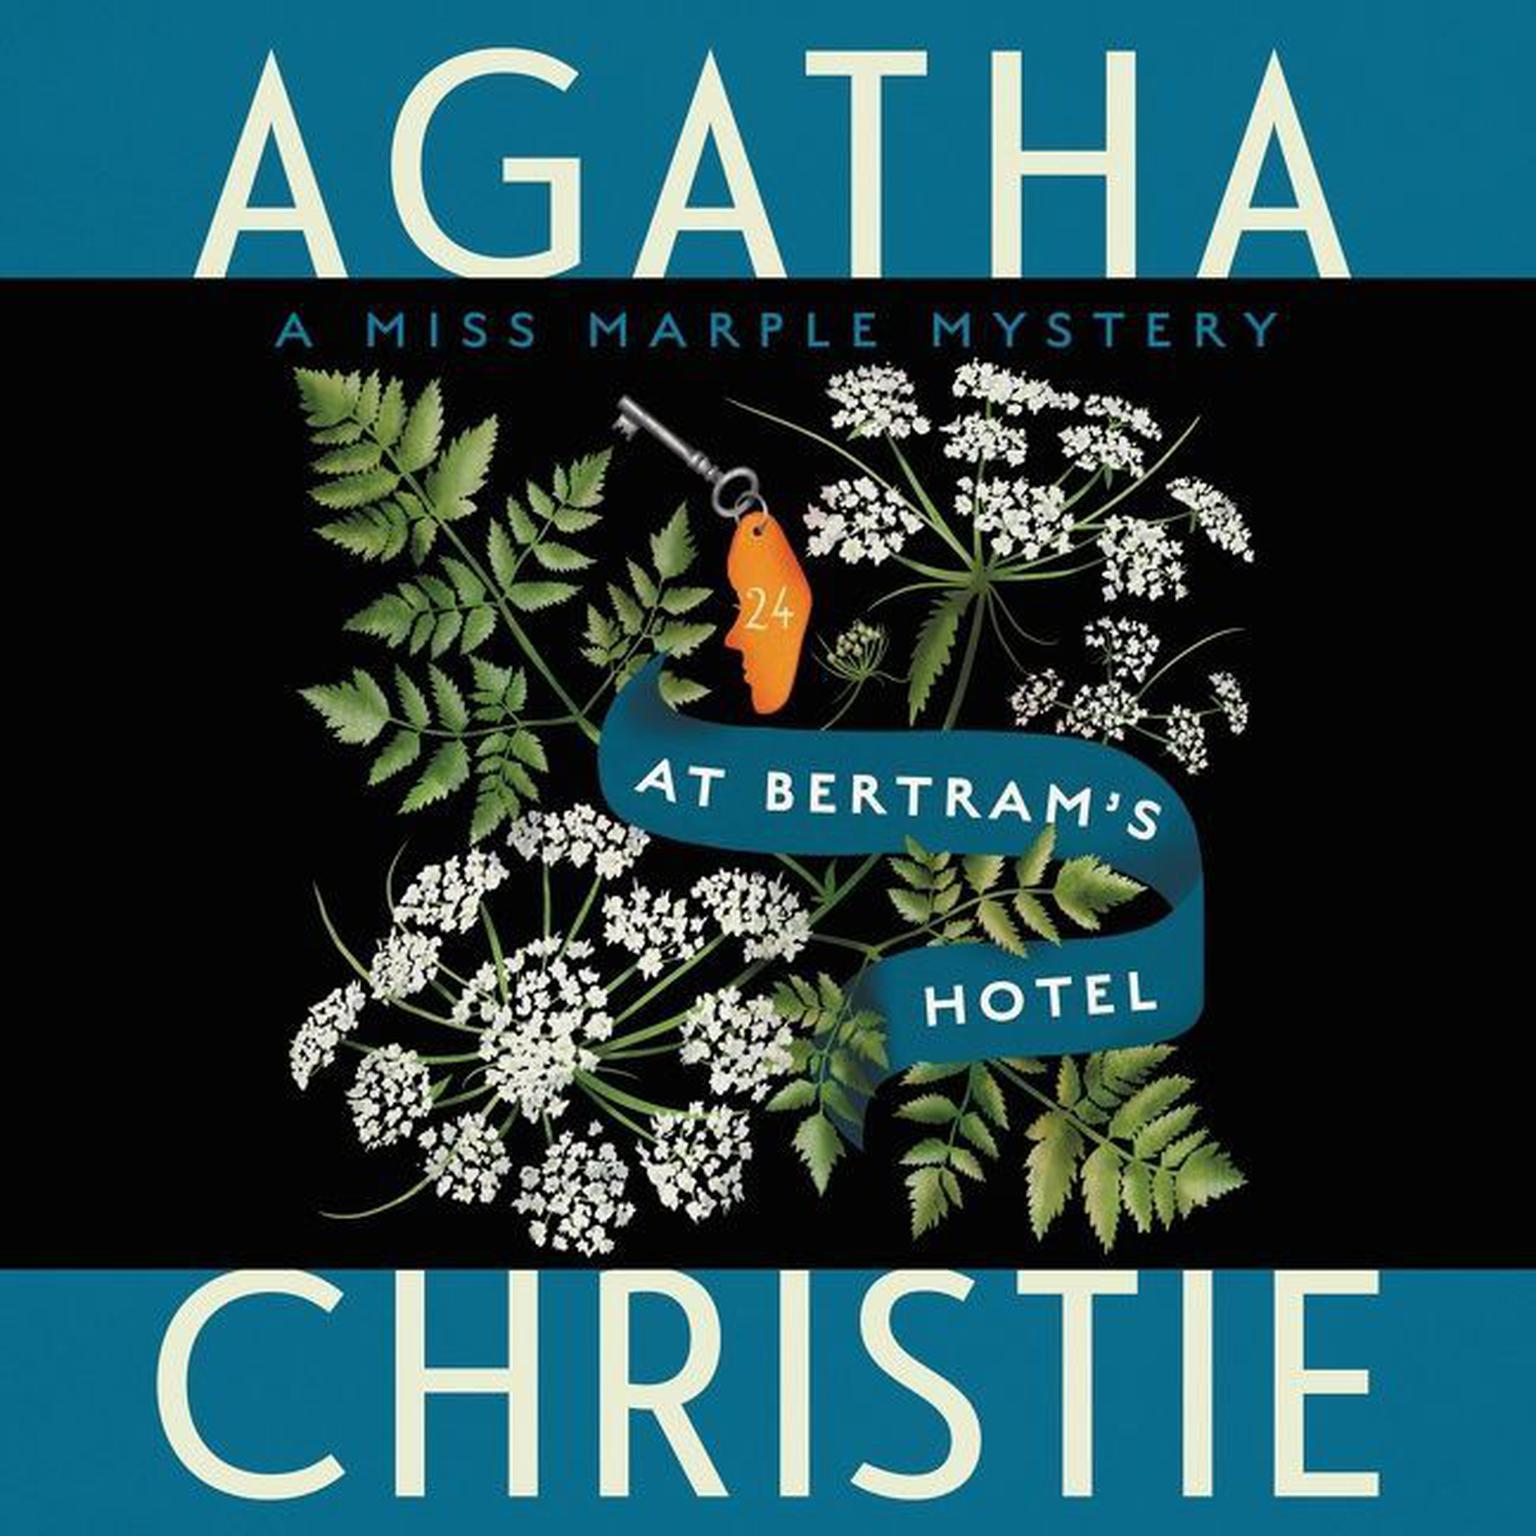 At Bertrams Hotel: A Miss Marple Mystery Audiobook, by Agatha Christie